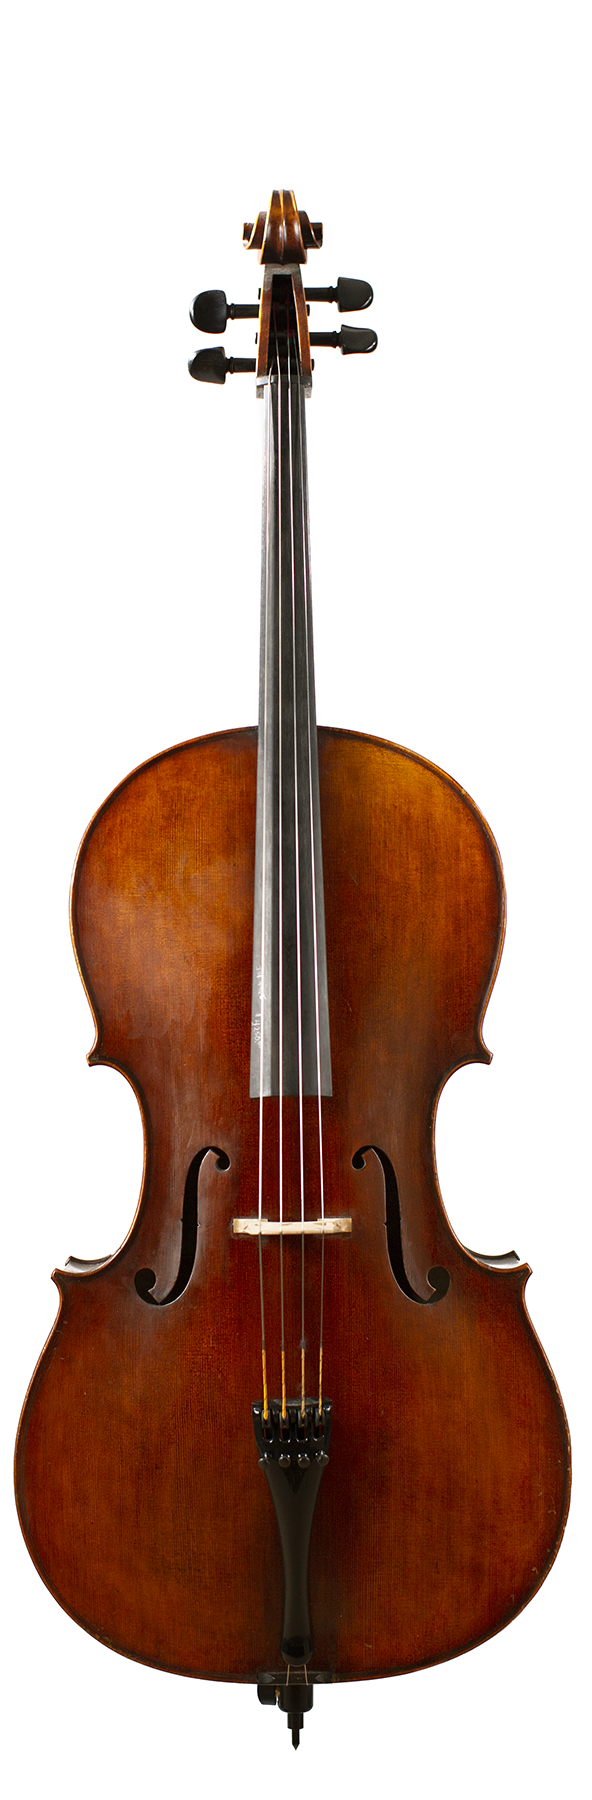 Widely flamed maple cello with Larsen strings. Perfect for the advanced level player looking for a well-rounded cello.